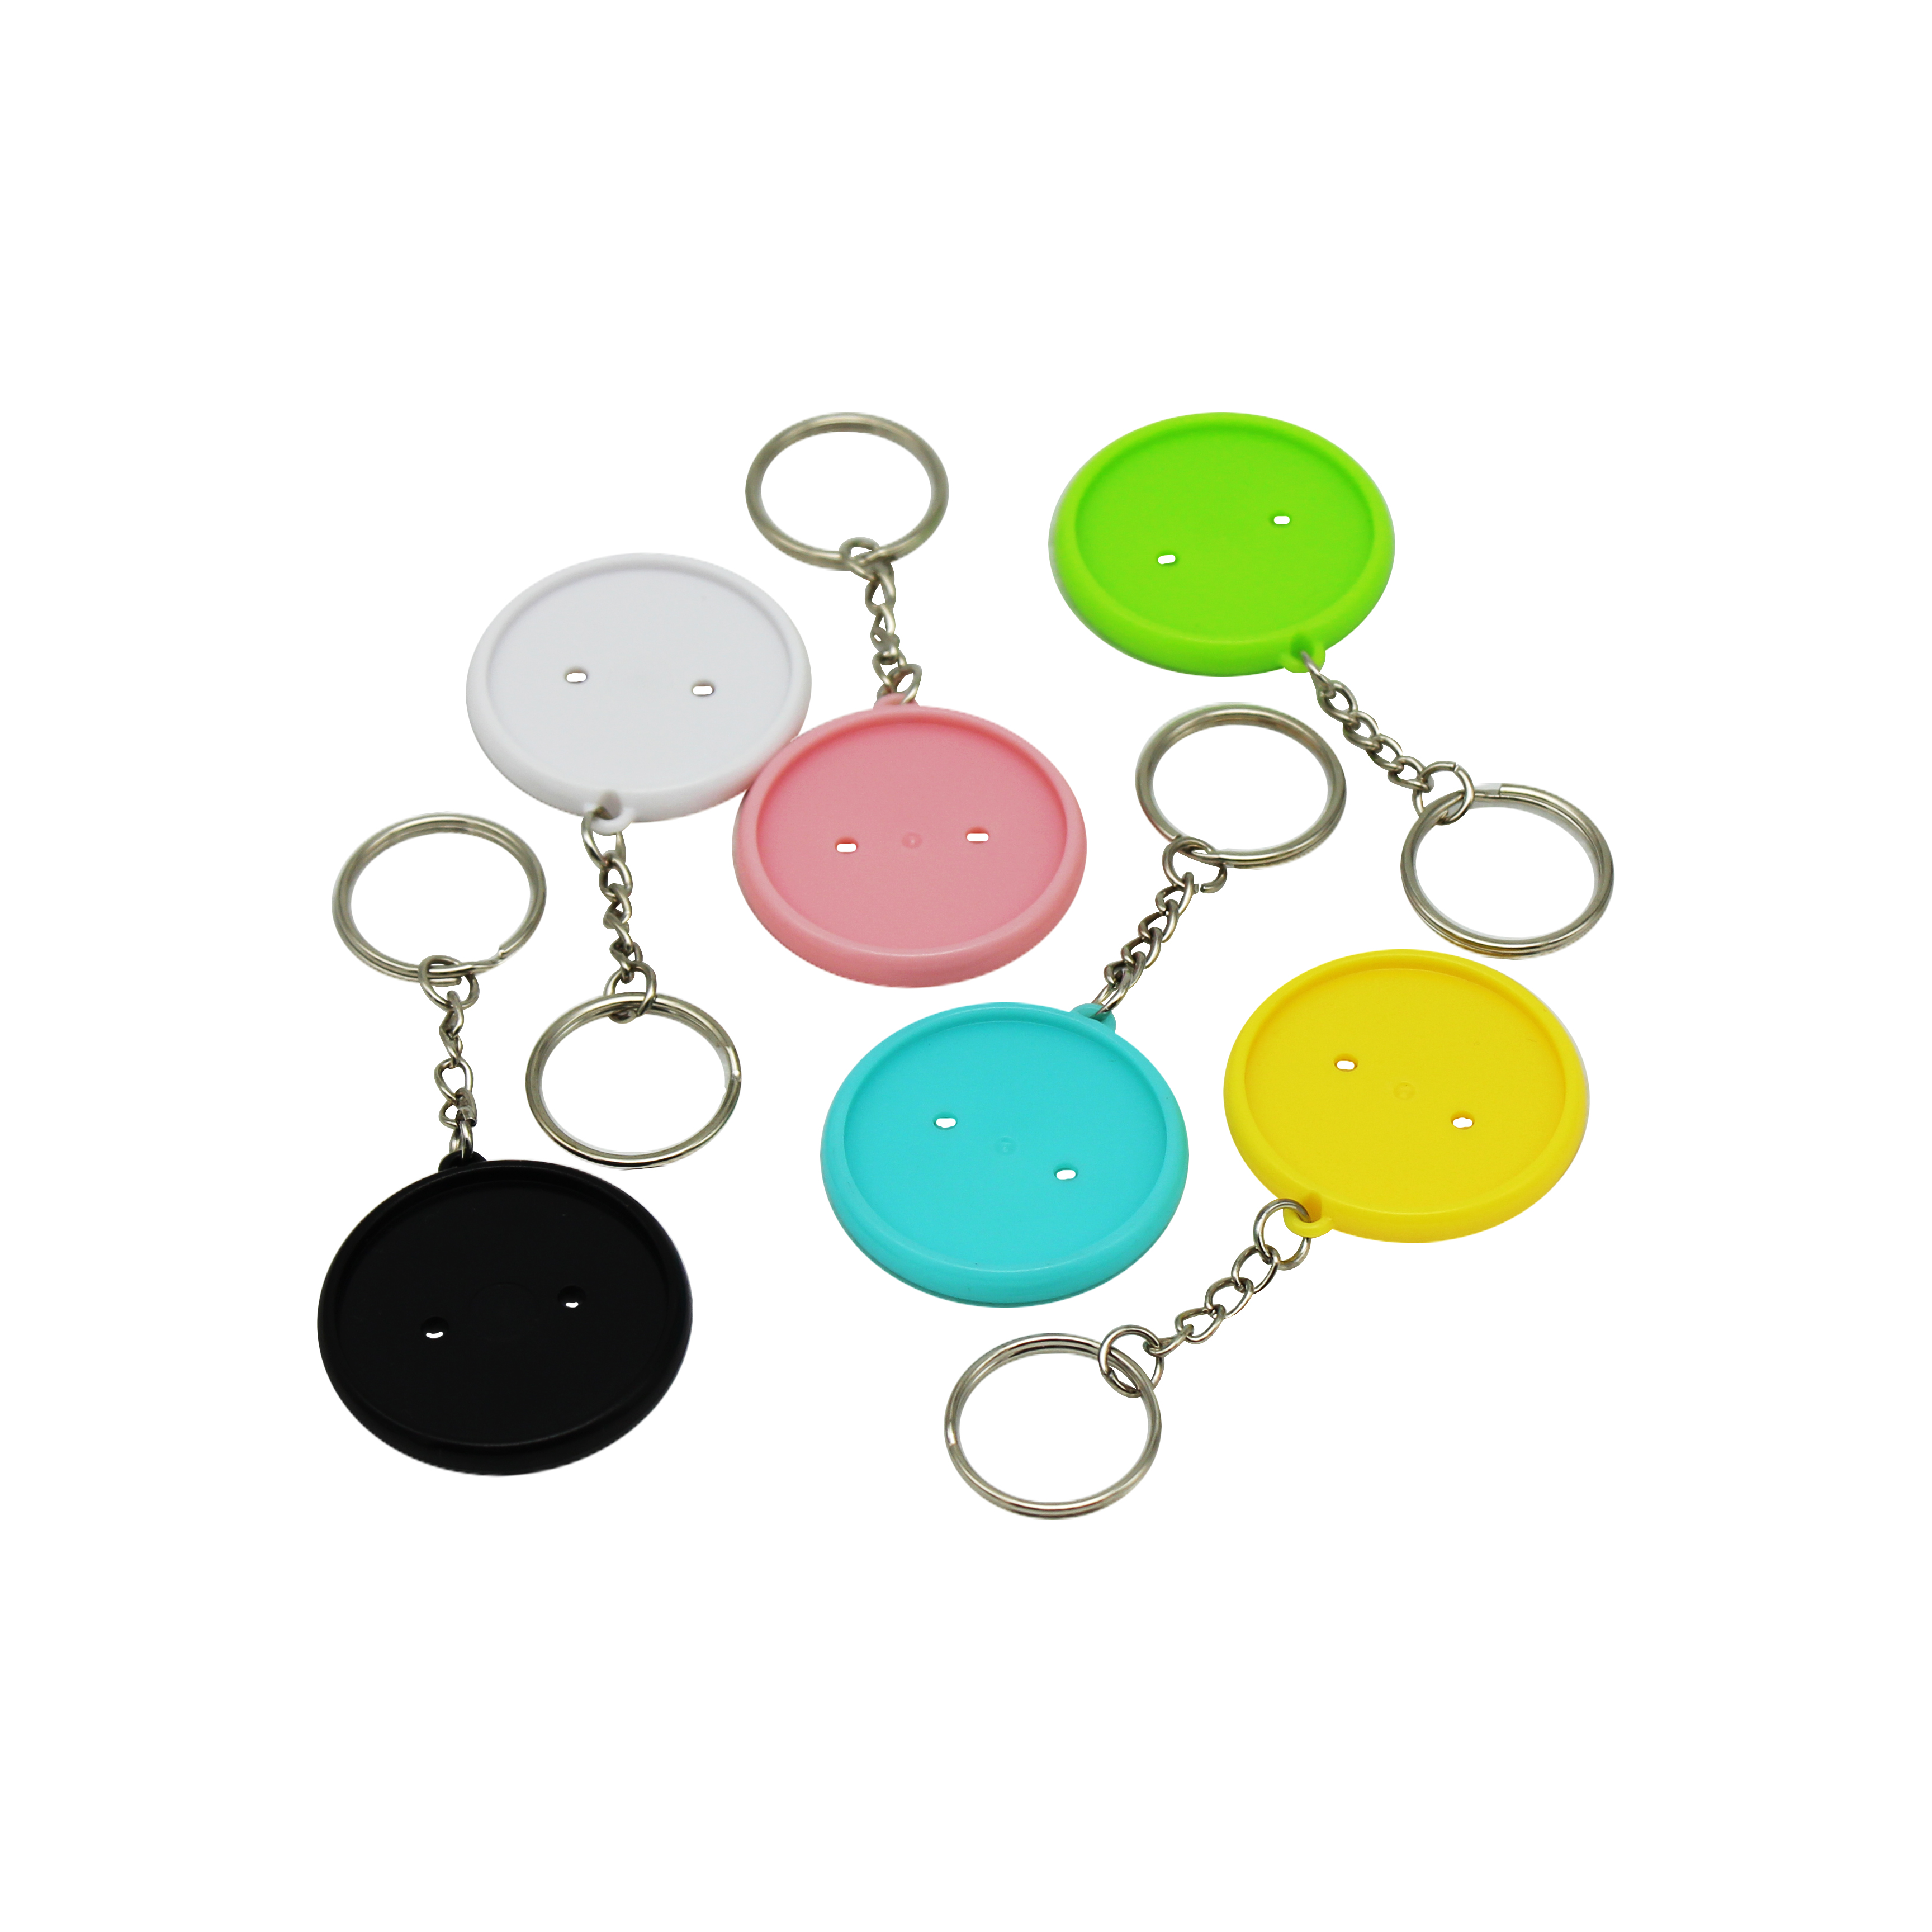 https://chibuttons.com/pub/media/Listing_Product_Images/Parts/ROUND/37mm_keychain_parts.jpg